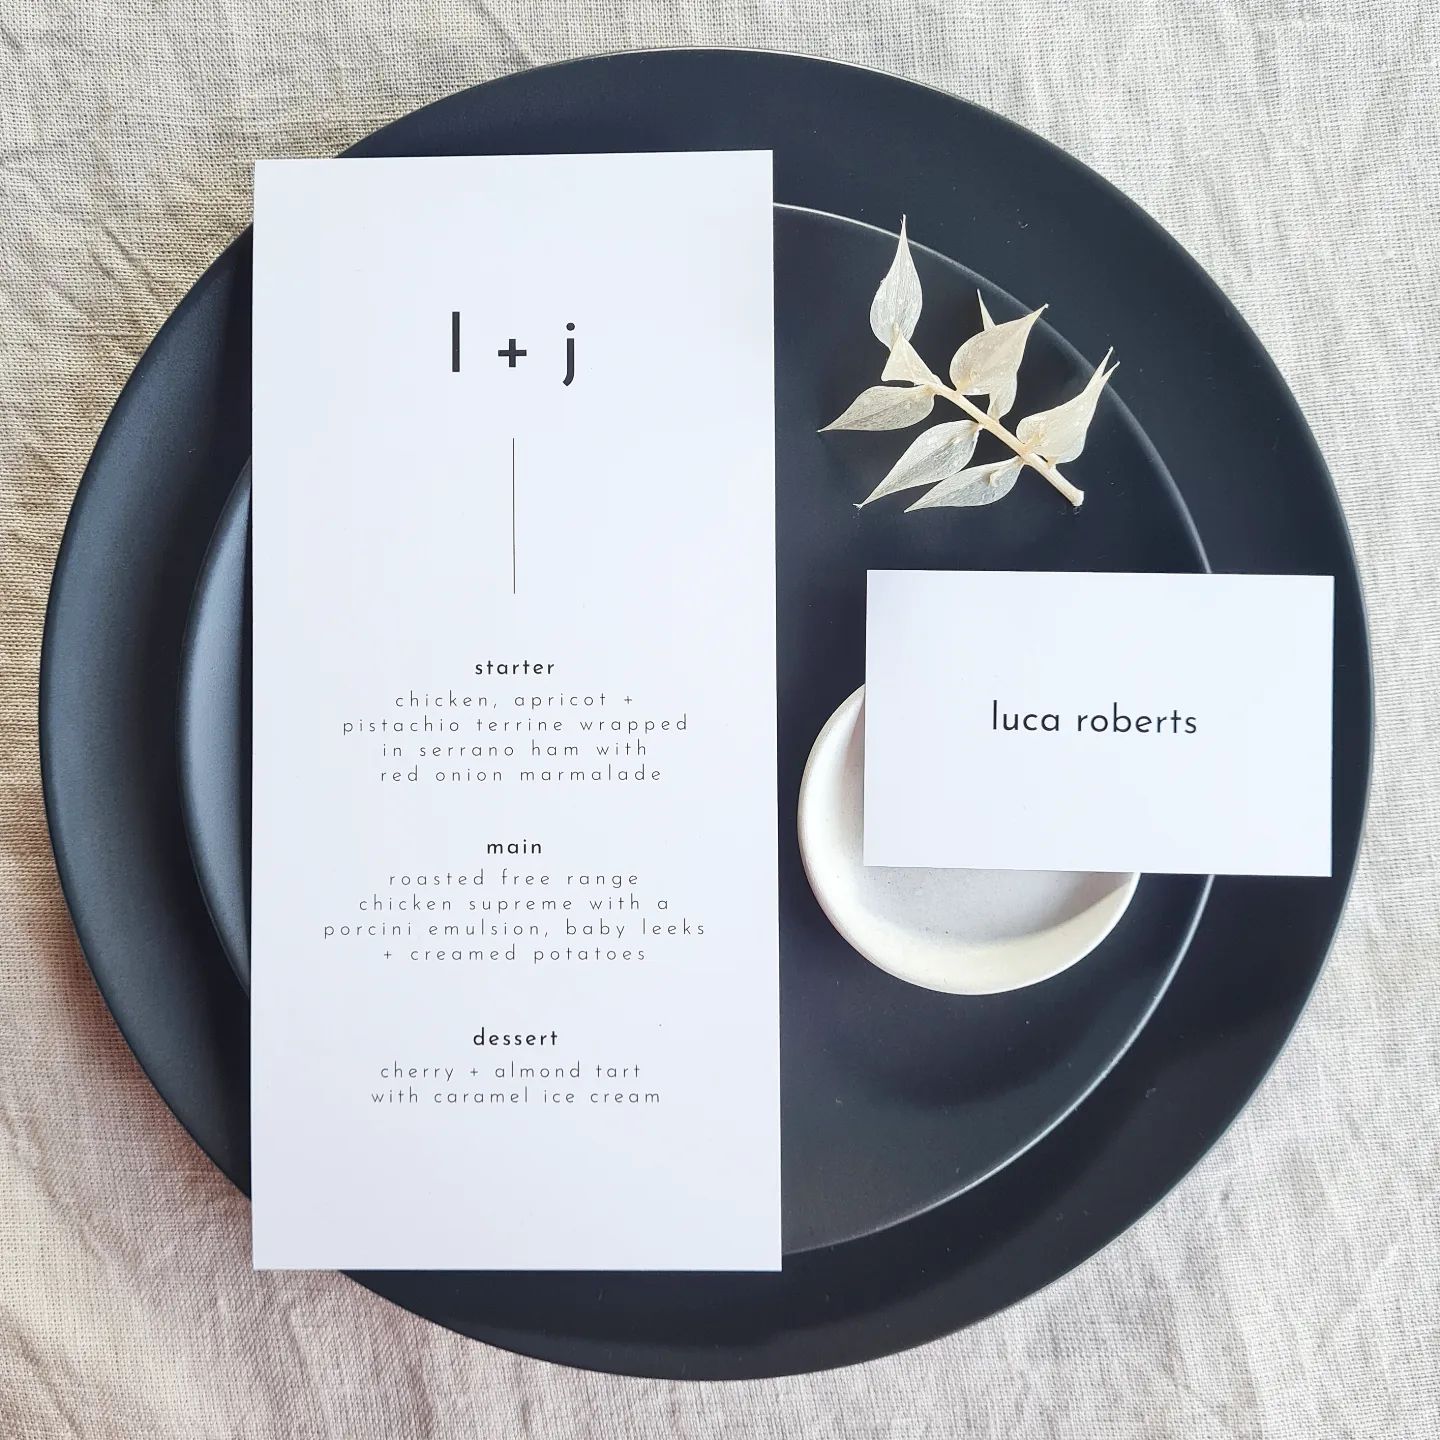 A black and white wedding menu with the text "l +j" and a place card are placed on a black plate. The plate is set on a beige linen background and is accompanied by a white floral elements and small plate. The overall aesthetic is elegant and sophisticated.